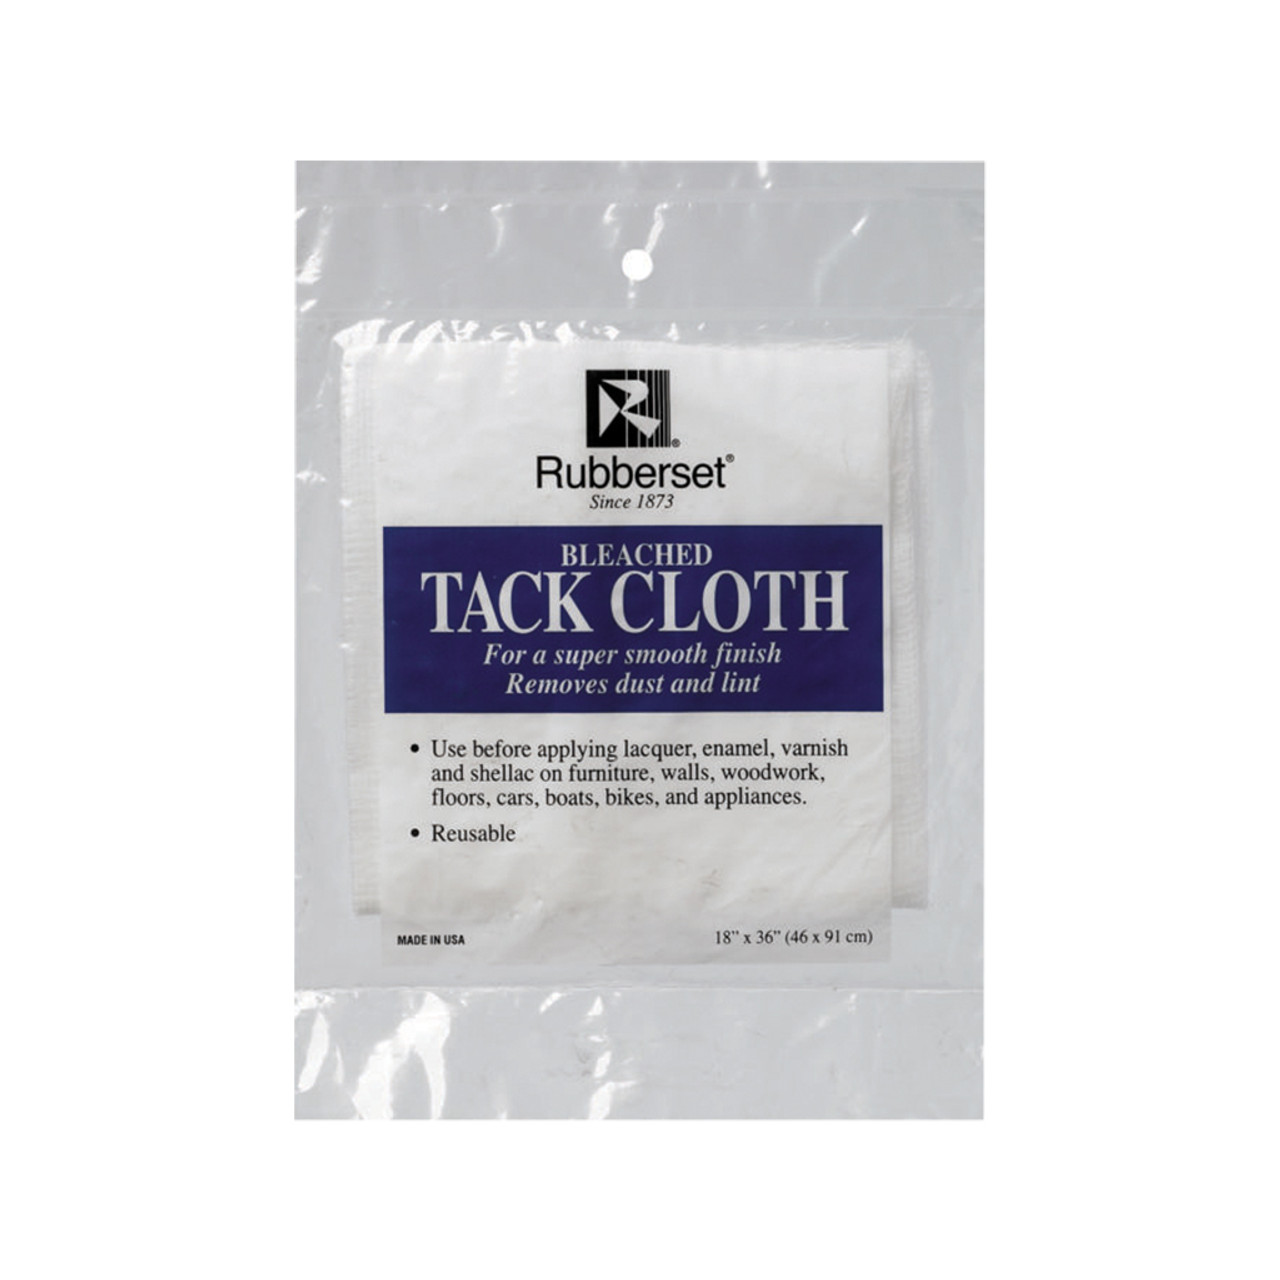 Trimaco SuperTuff Professional Tack Cloth, 18 x 36 - Midwest Technology  Products